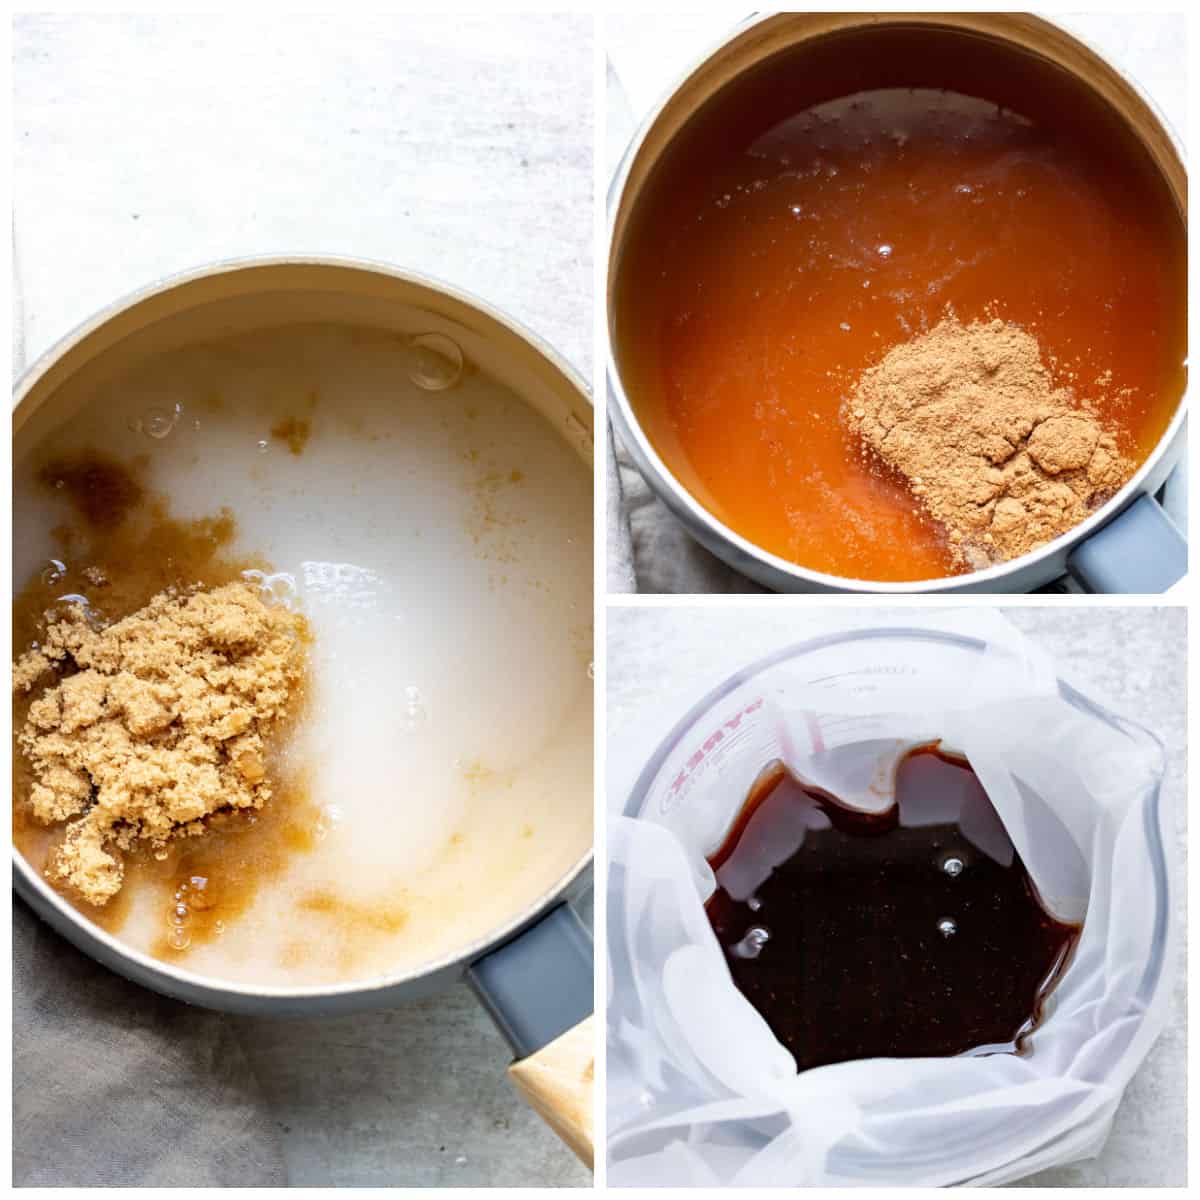 Collage of steps making chai syrup: pot of water and sugar, spices added, strained.